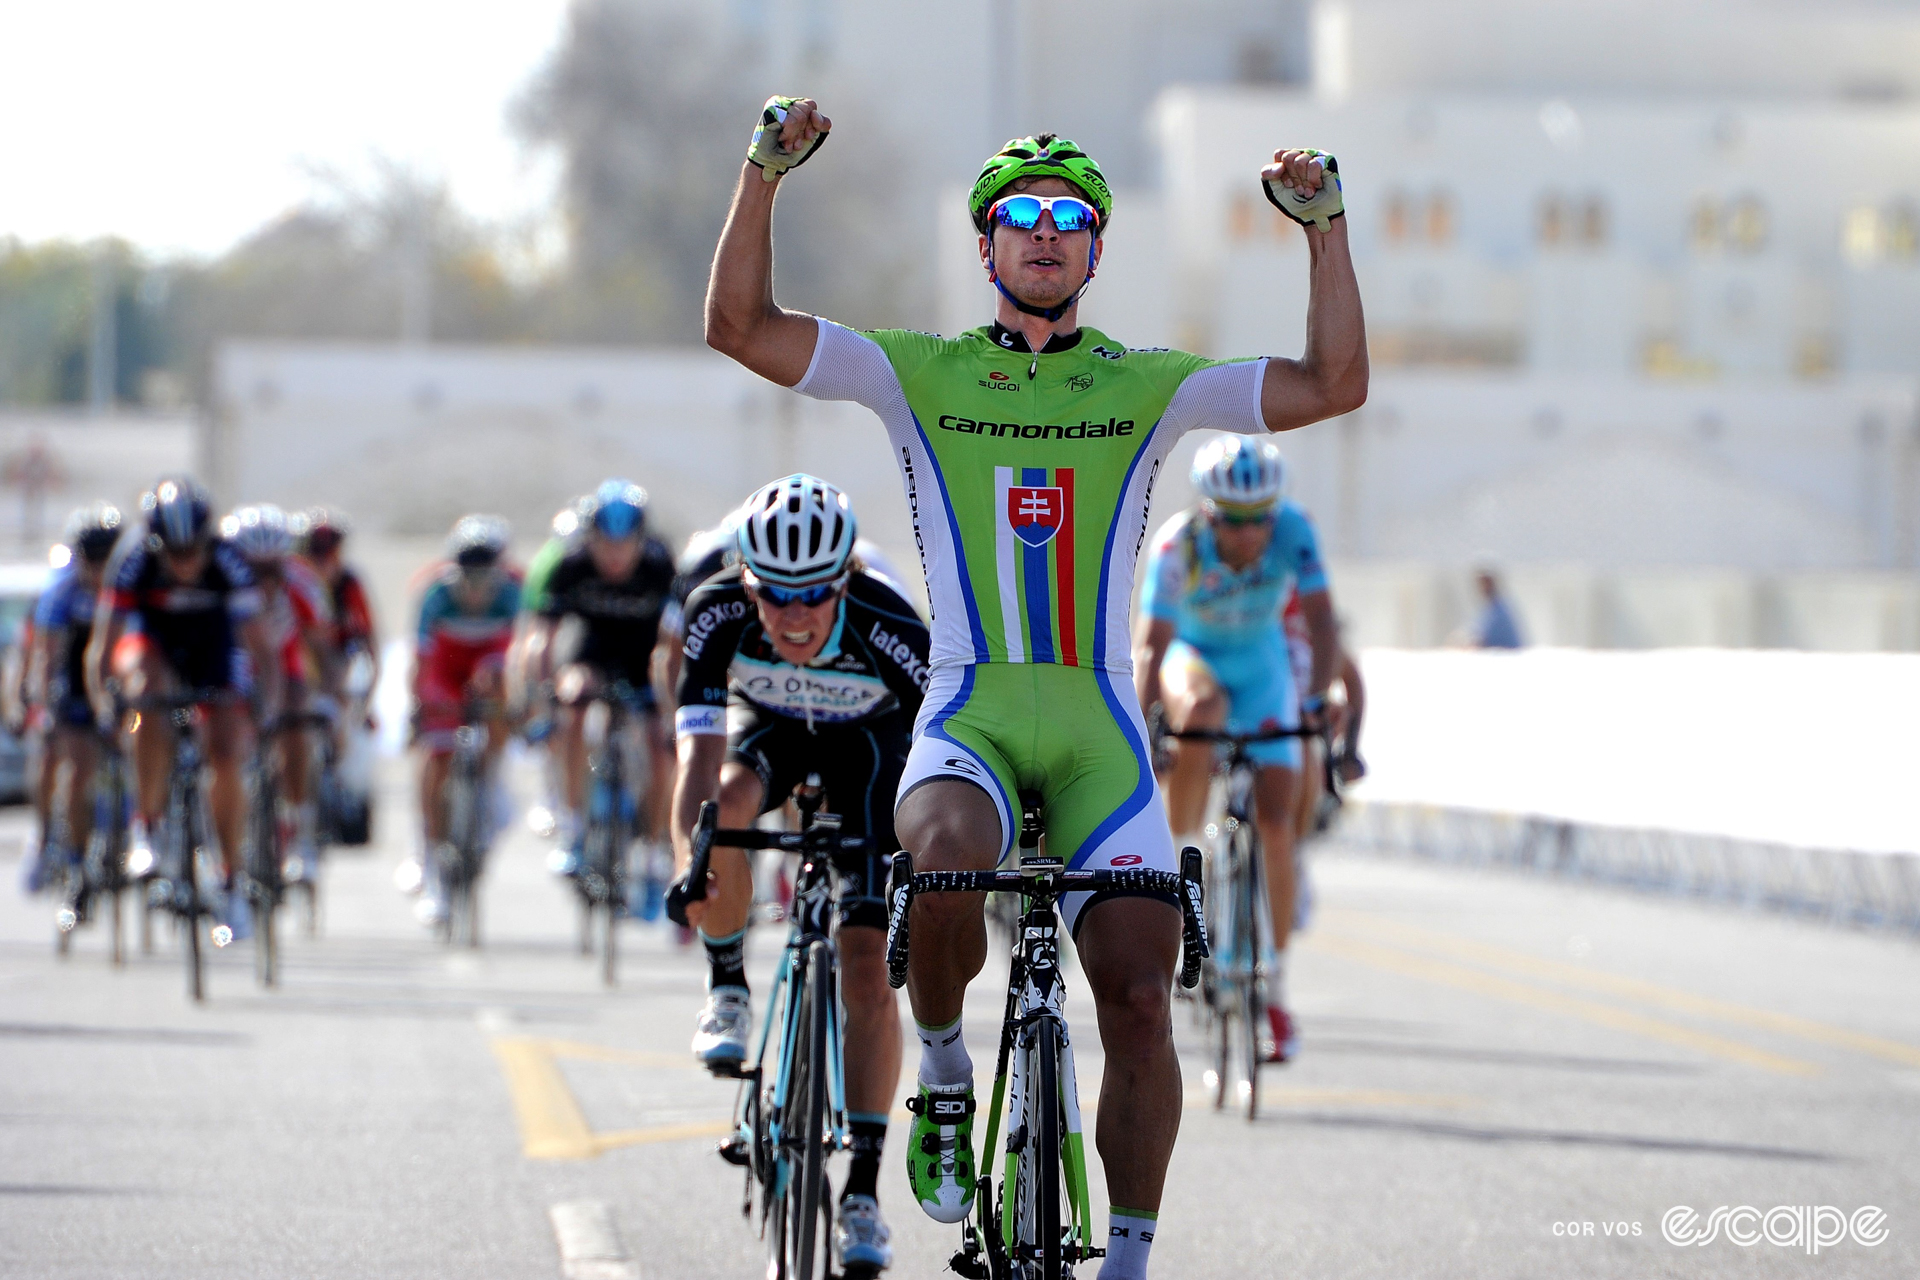 Peter Sagan celebrates winning a stage at the 2014 Tour of Oman with a double overhead fist-pump.